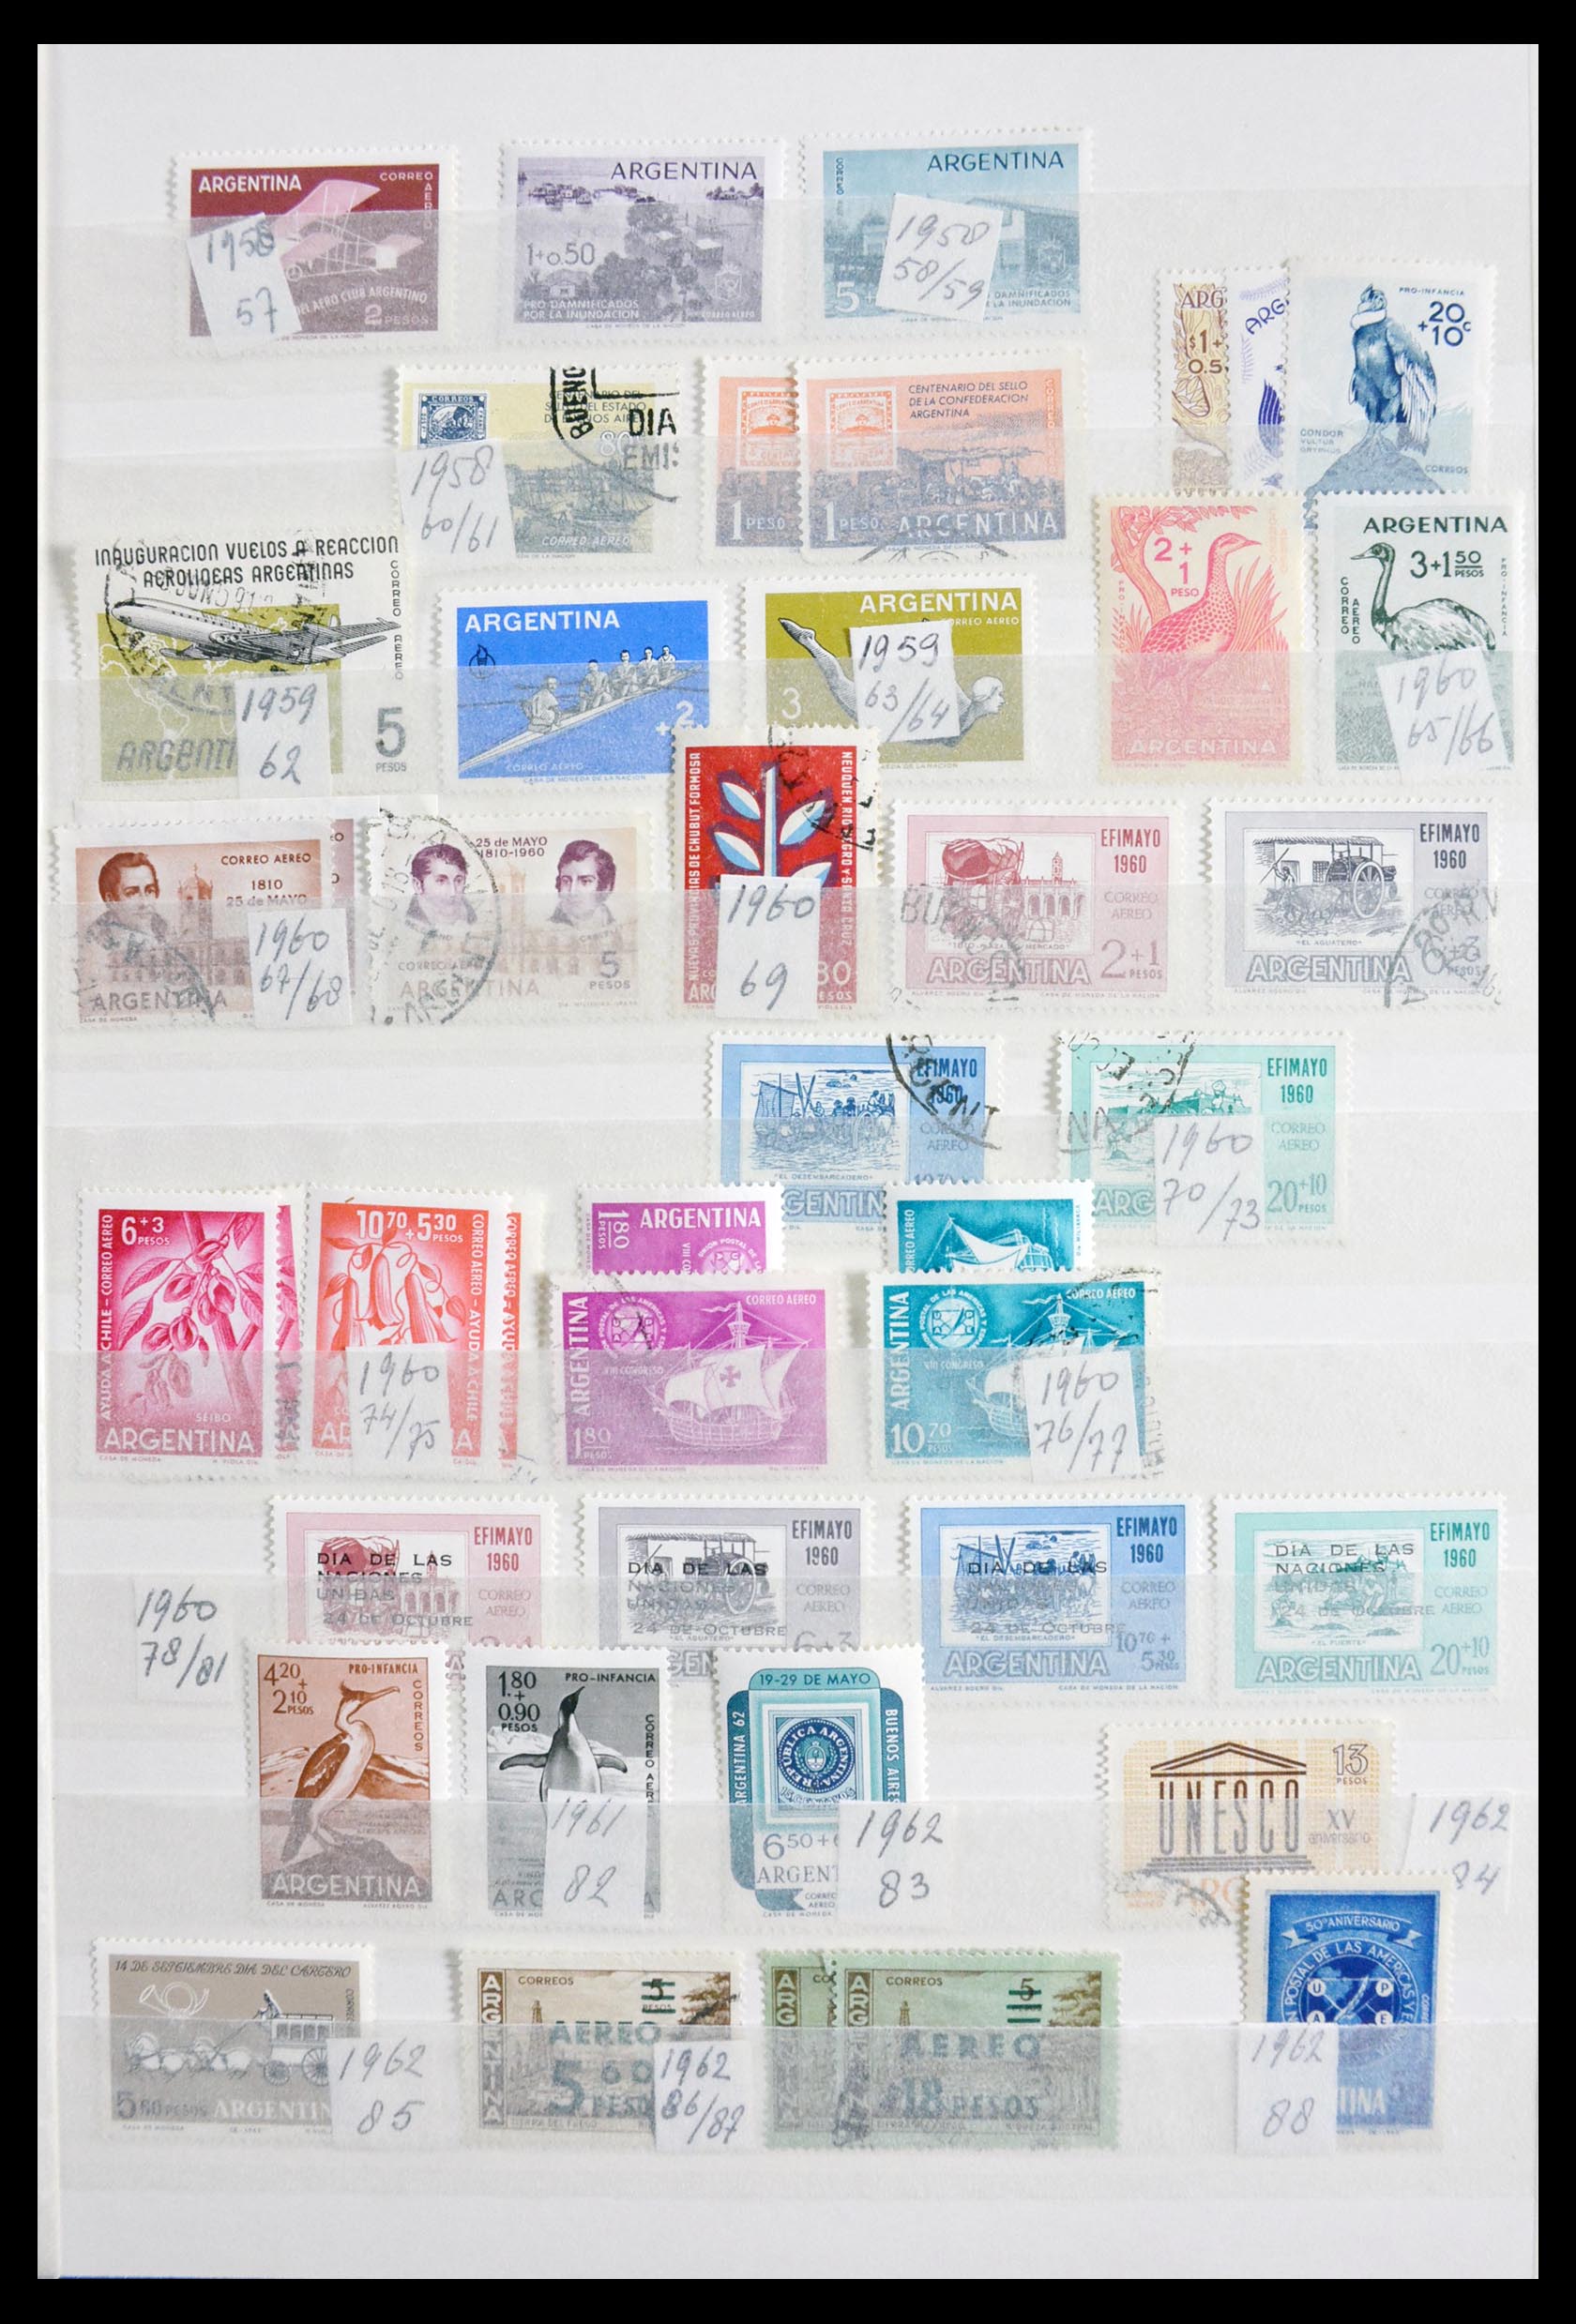 29917 003 - 29917 Latin America airmail stamps.